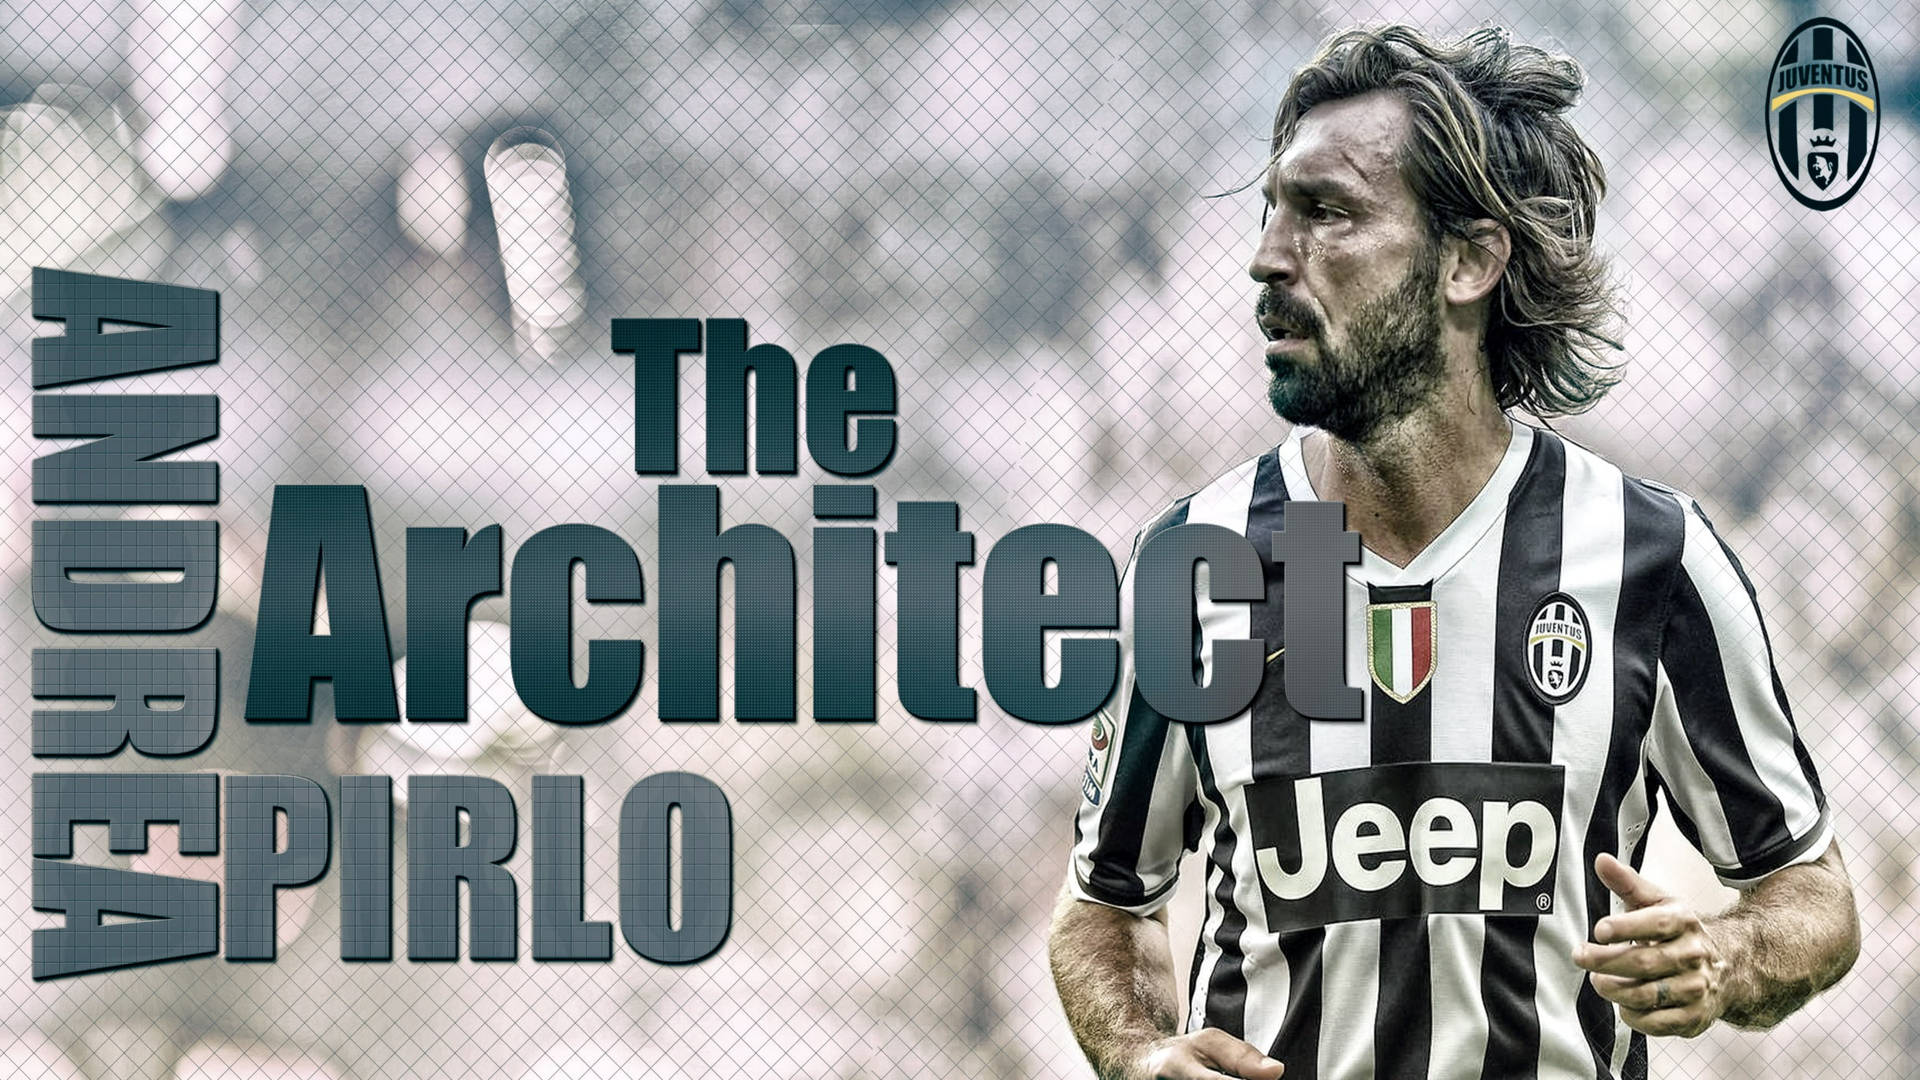 The Legendary Andrea Pirlo In Action On The Football Field Background